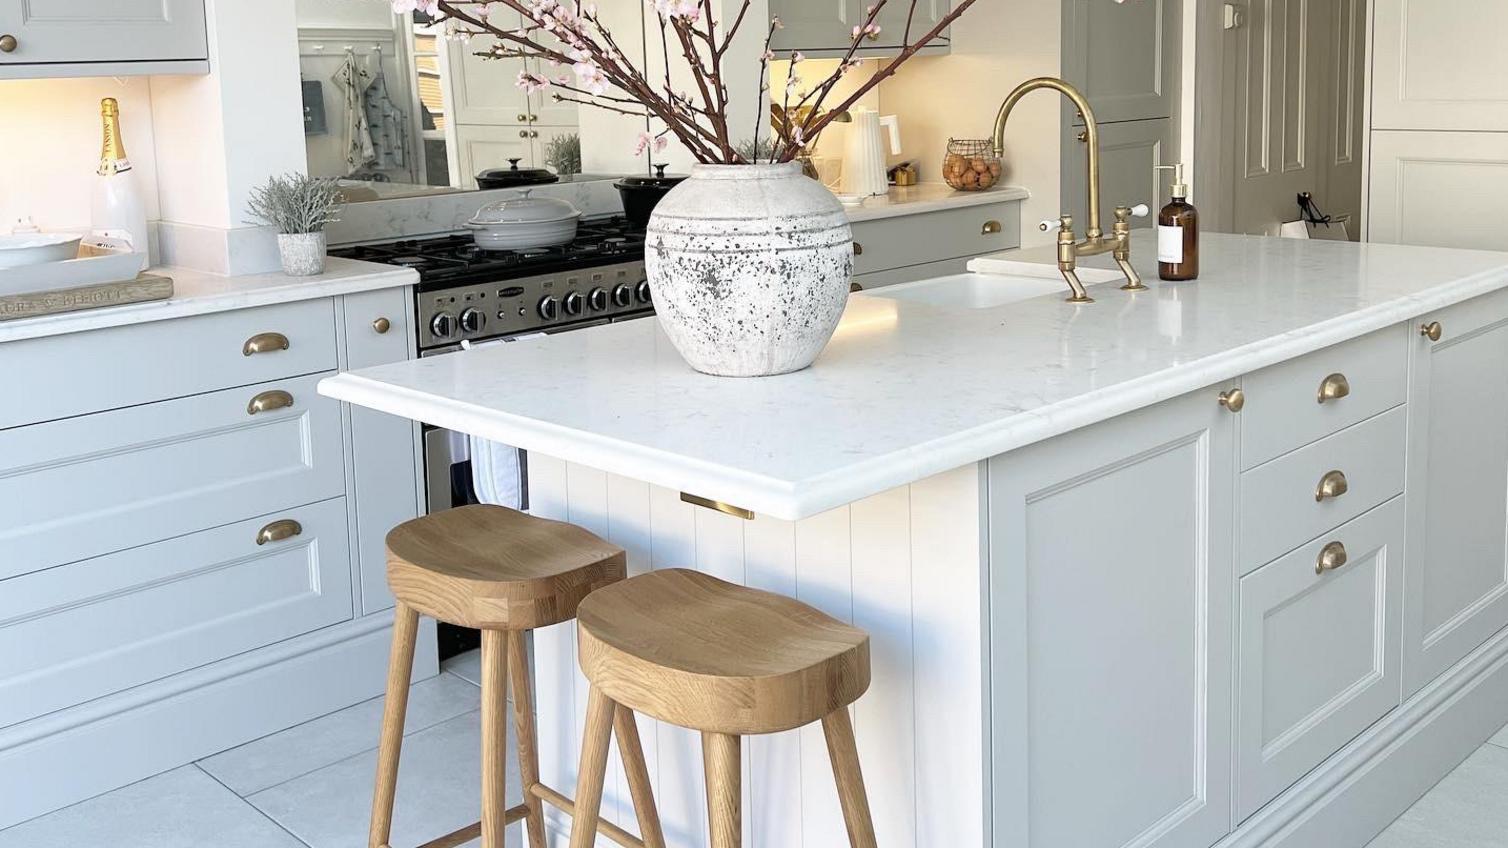 Small Kitchen Islands: 10 Ideas For Cooking, Dining And More